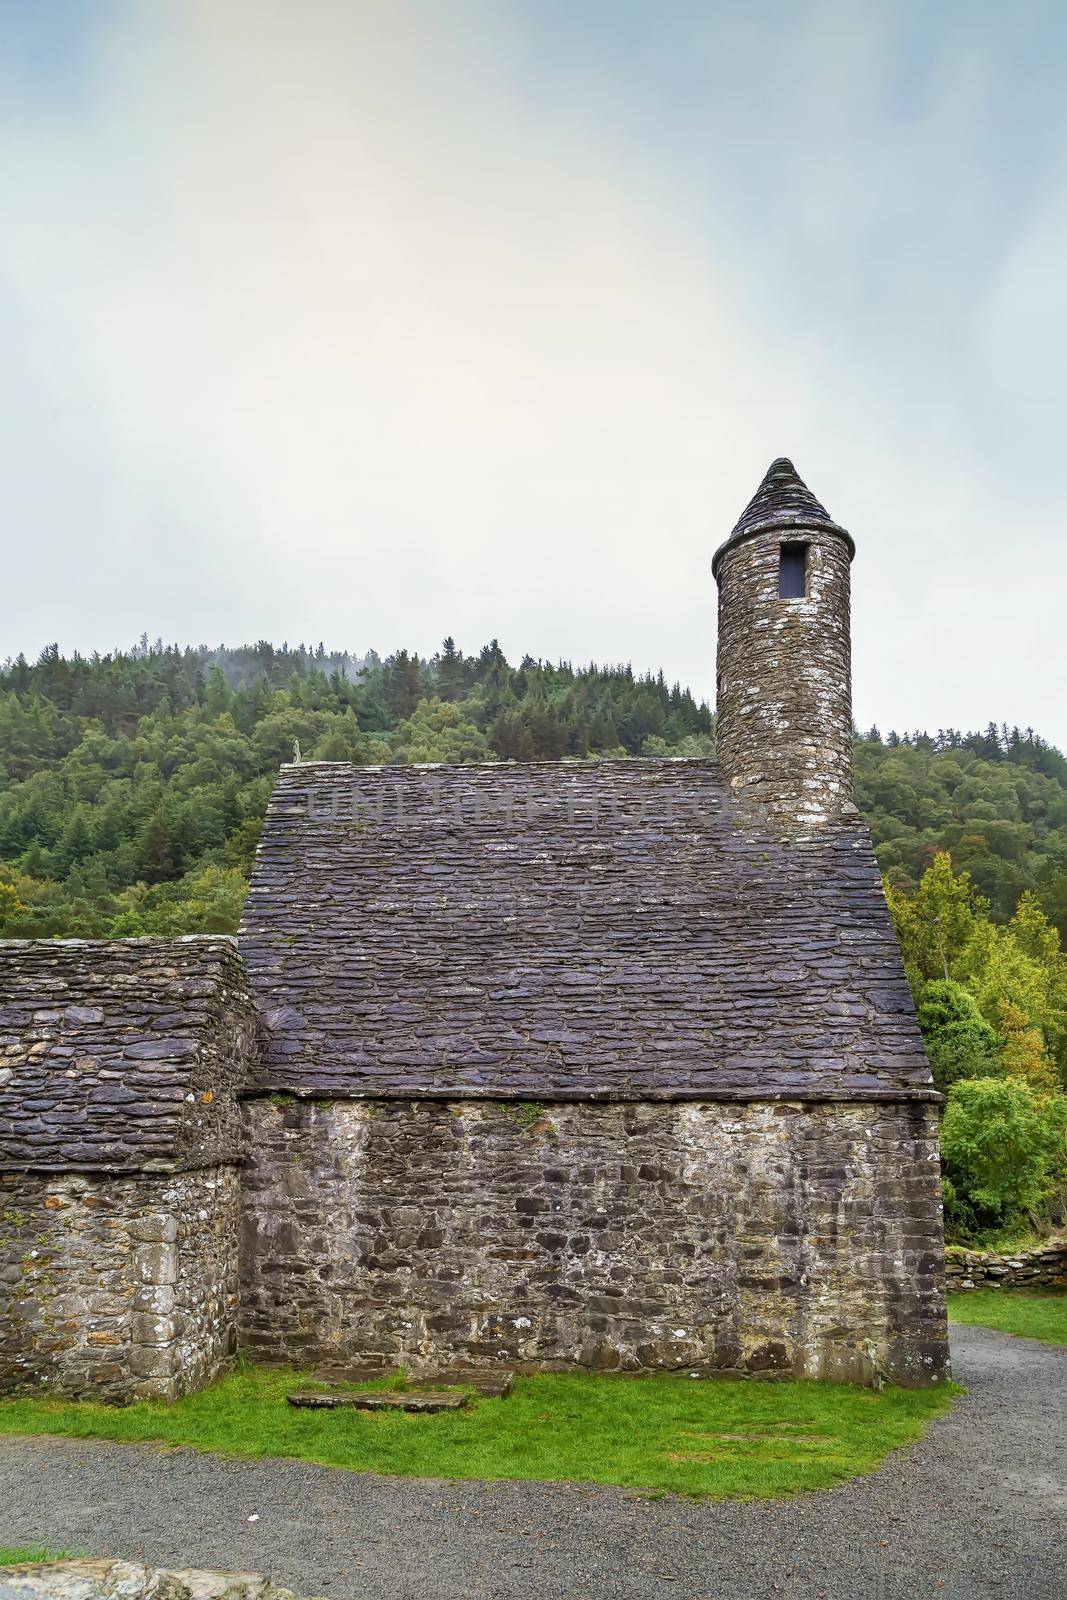 St. Kevin's Church with the Round Tower in Glendalough, Ireland